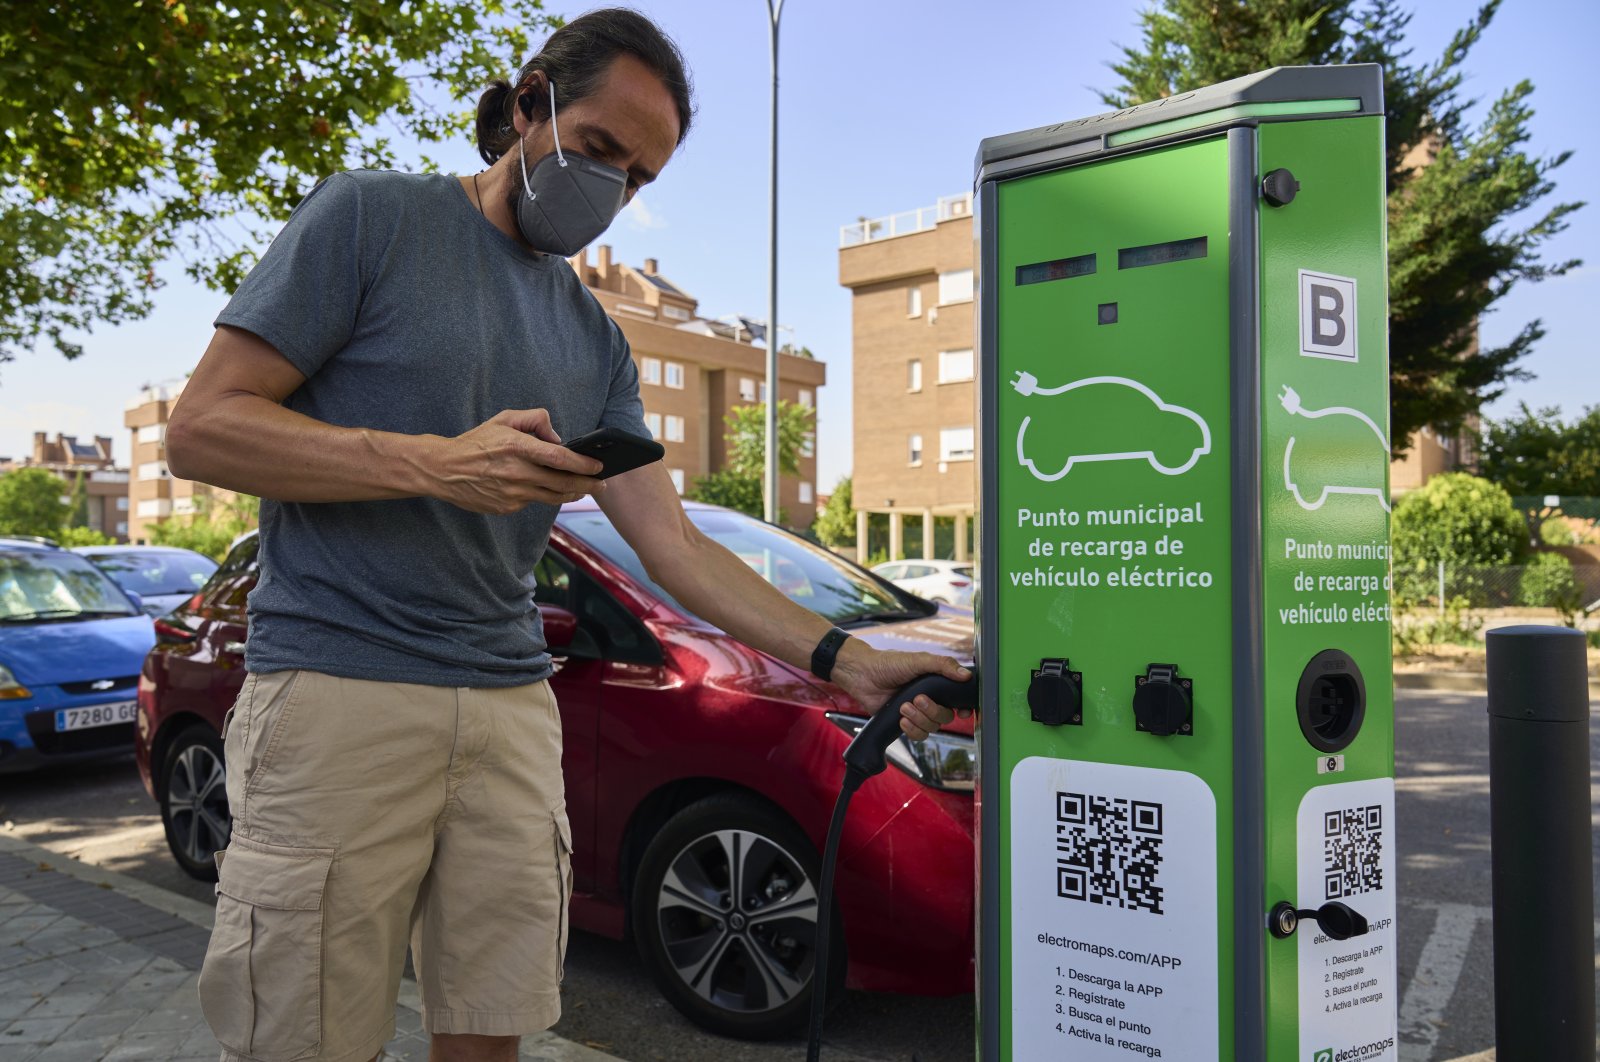 A man charges his electric car at an electrical charging point in Rivas Vaciamadrid, Spain, June 15, 2021. (AP Photo)